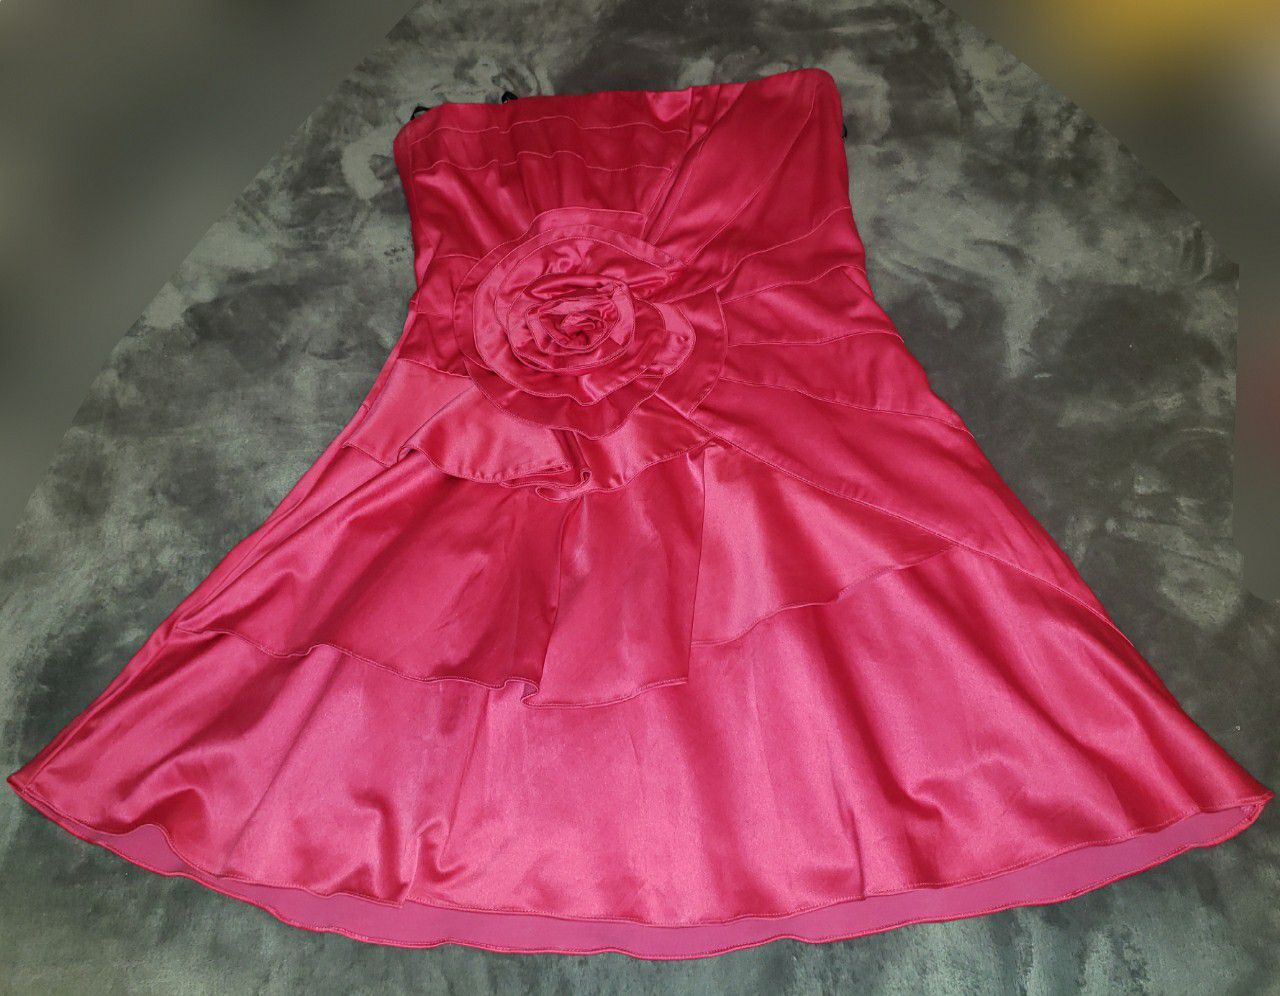 Brand: XoXo strapless ruffle dress. Size:11 (fits someone larger too size comes "slightly" bigger).